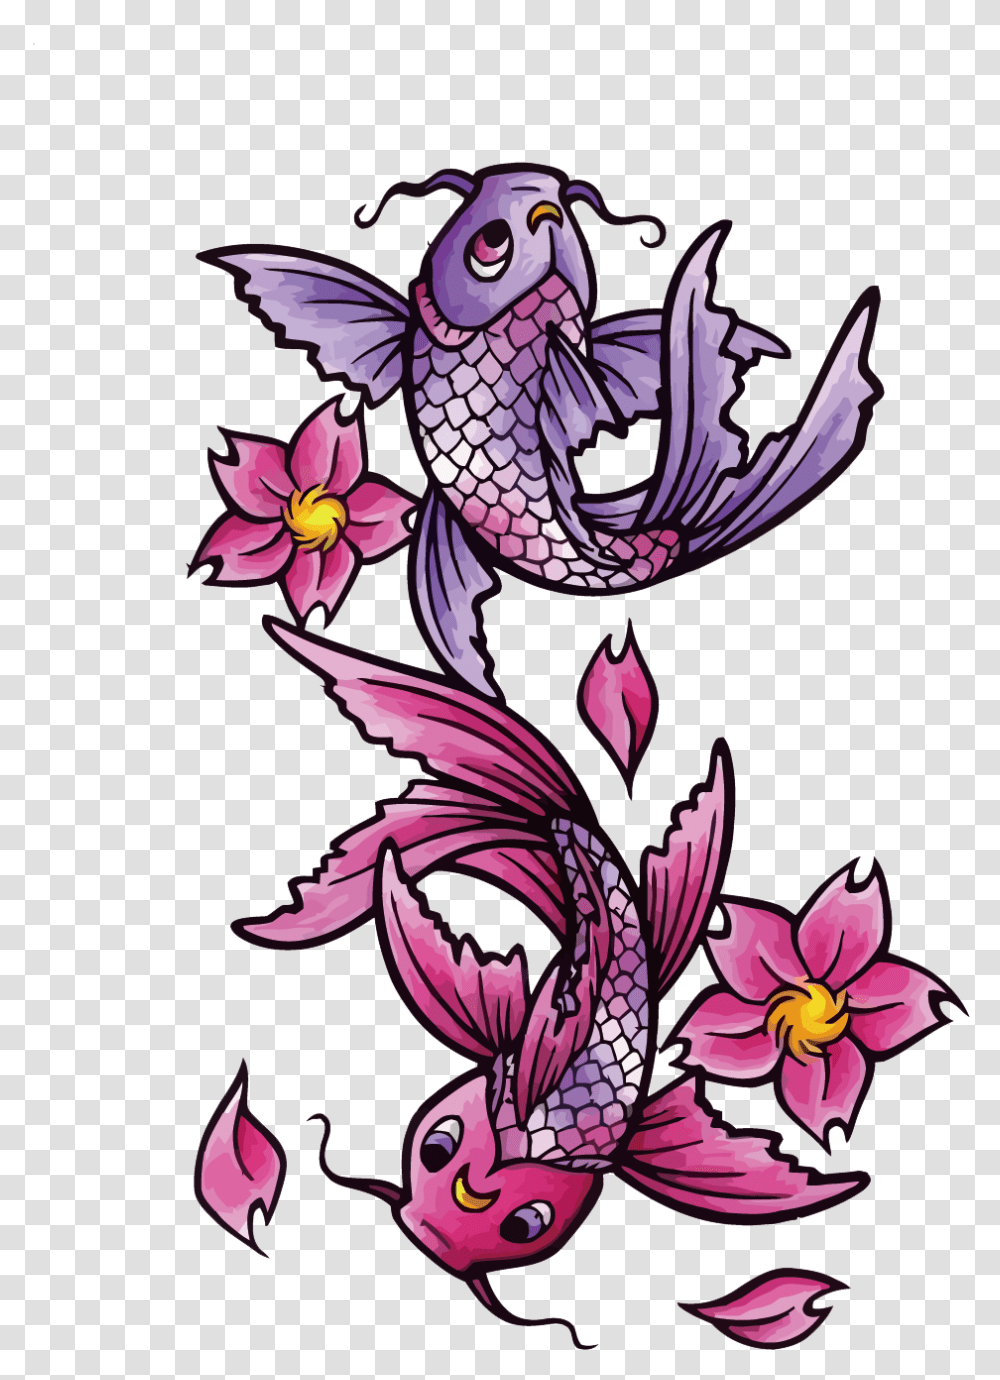 Butterfly Koi Tattoo Black And Gray Fish Koi Tattoo Design, Floral Design, Pattern Transparent Png